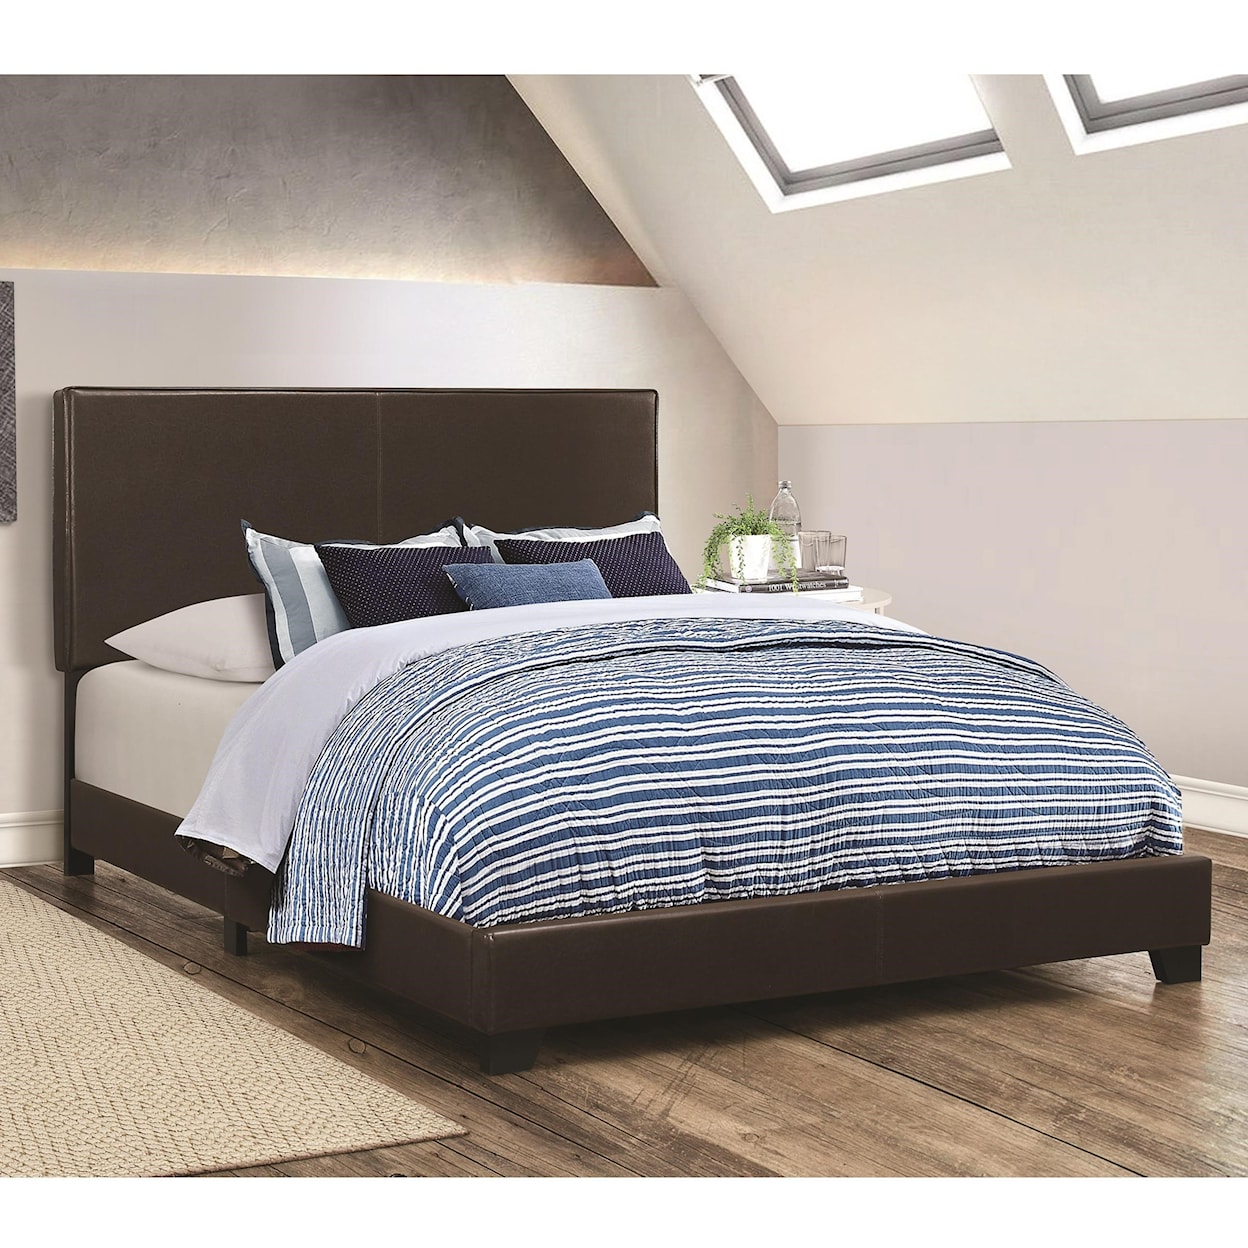 Coaster Dorian Brown BROWN BYCAST KING BED |